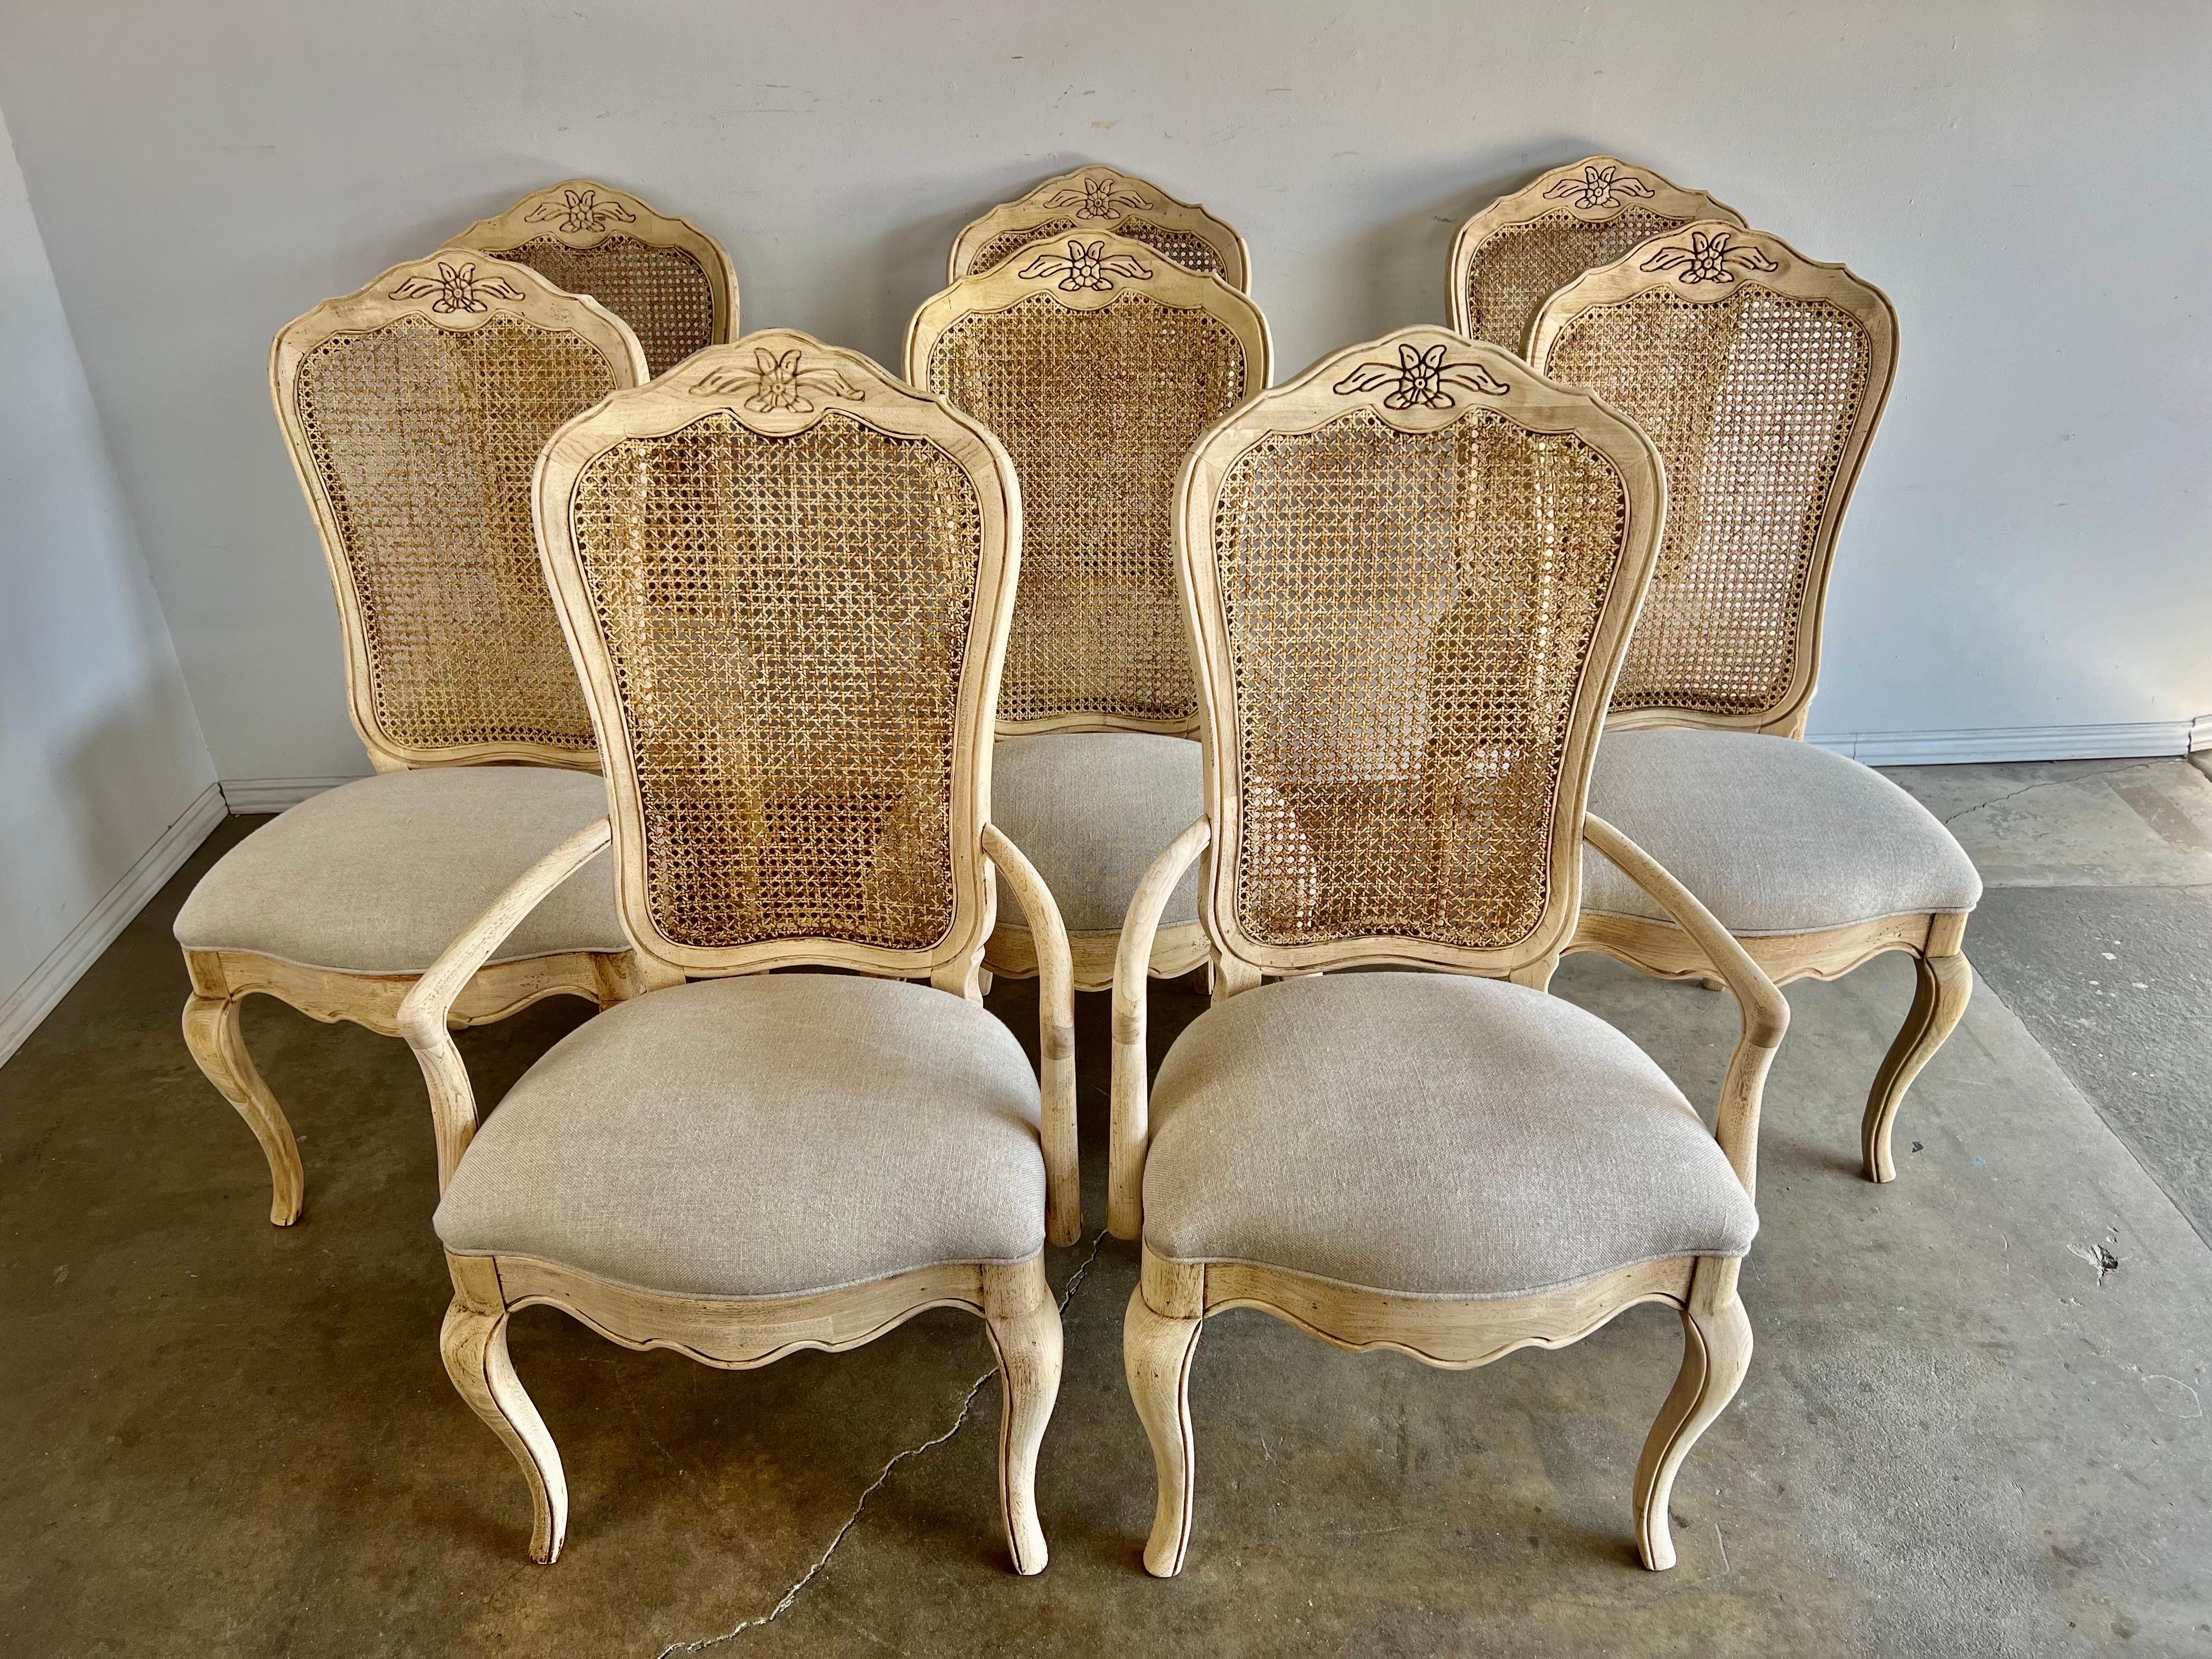 Set of eight French cane back dining chairs.  The chairs are newly upholstered in a washed Belgium linen.  The chairs stand on four cabriole legs with a scalloped apron across the front.  There are flowers carved into the top portion of the frame. 